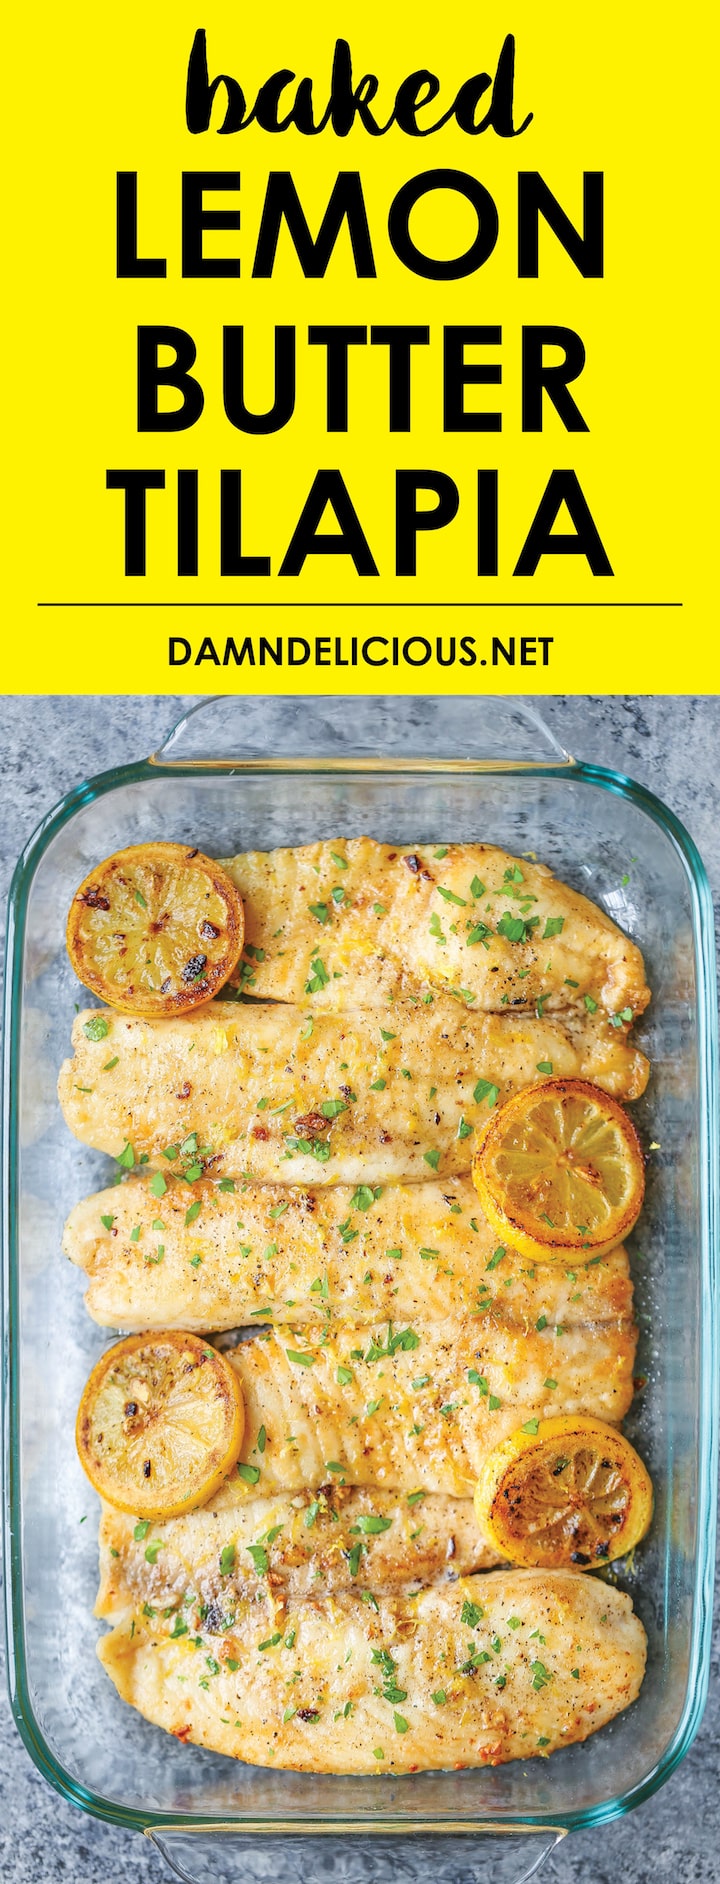 Baked Lemon Butter Tilapia - The easiest, most effortless 20 min meal ever from start to finish. And it’s all made in a single pan. Win-win situation here.